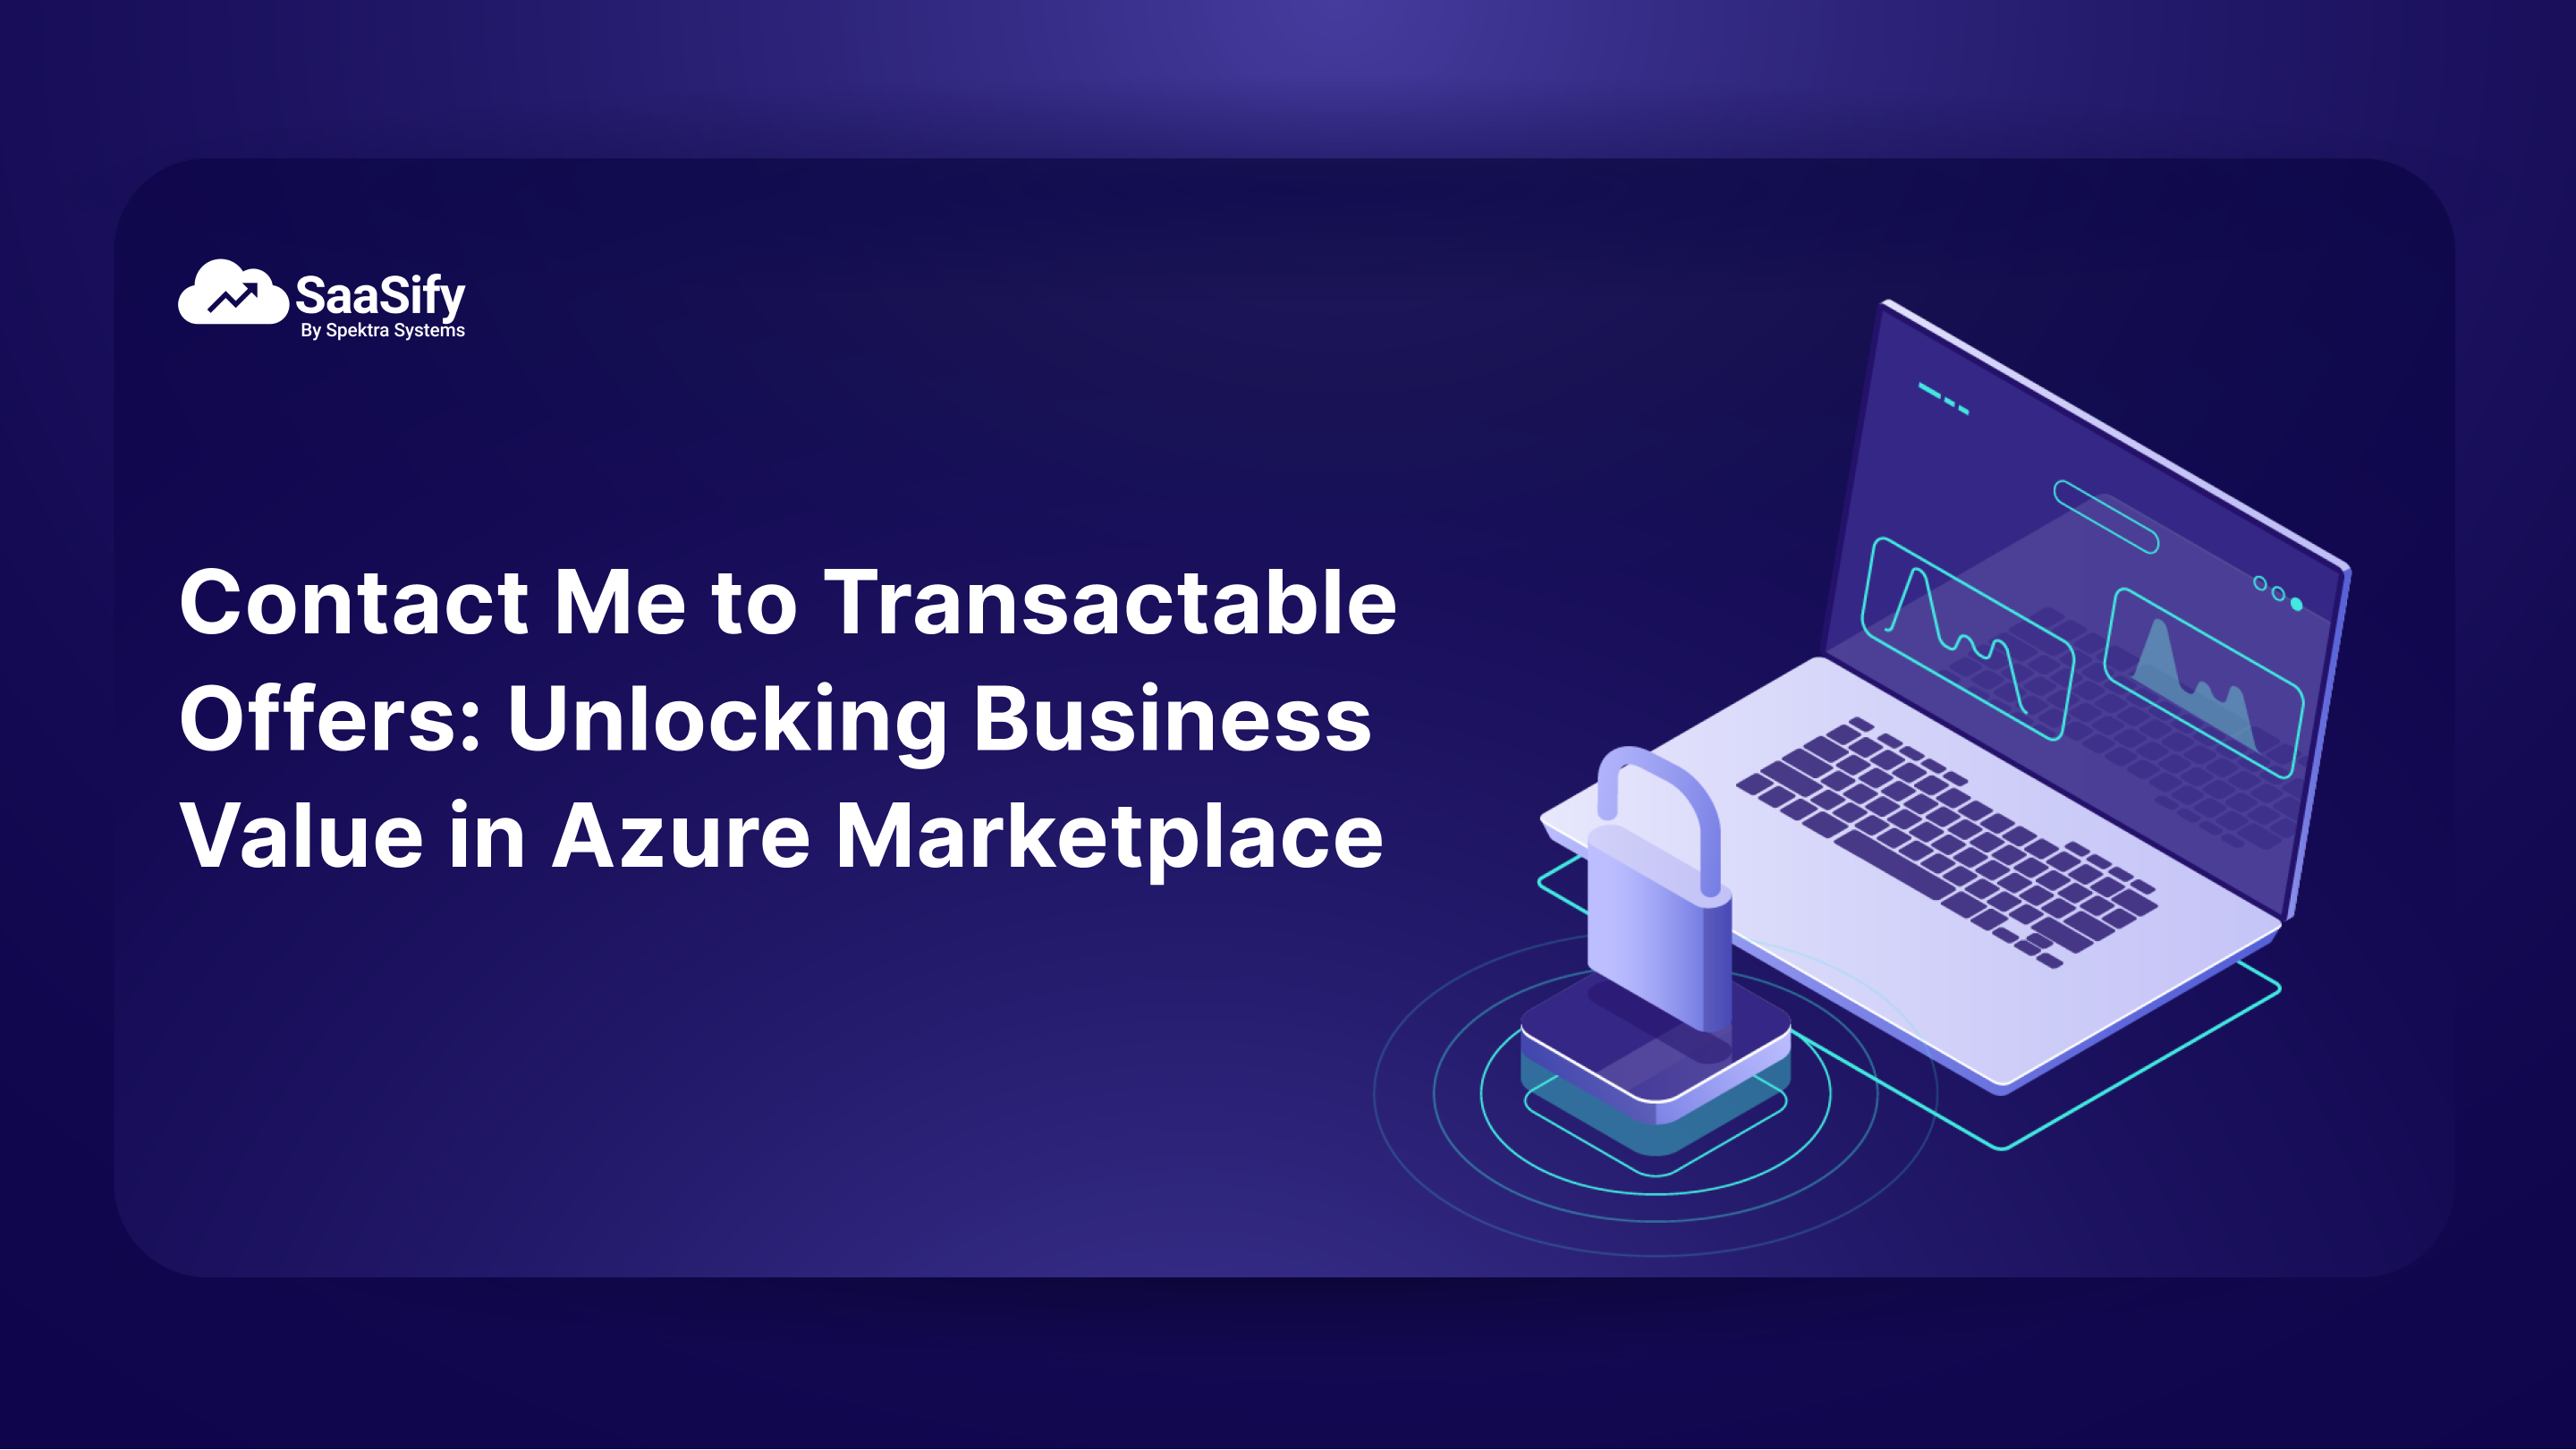 Contact Me to Transactable Offers: 5 Ways to Unlock Business Value in Azure Marketplace